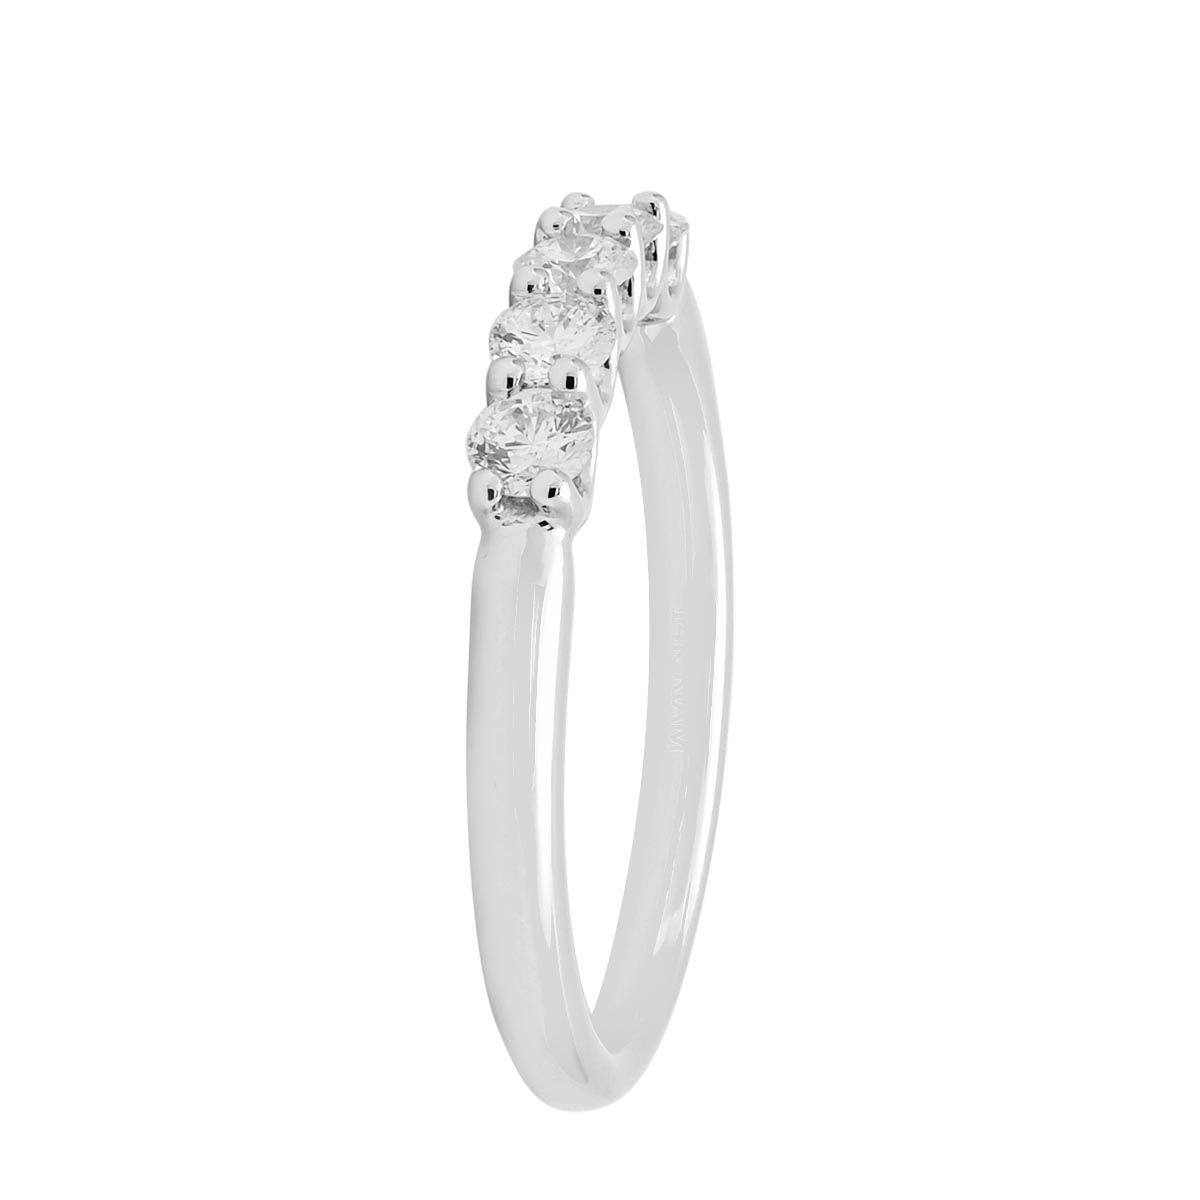 Northern Star Five Diamond Band in 14kt White Gold (1/2ct tw)